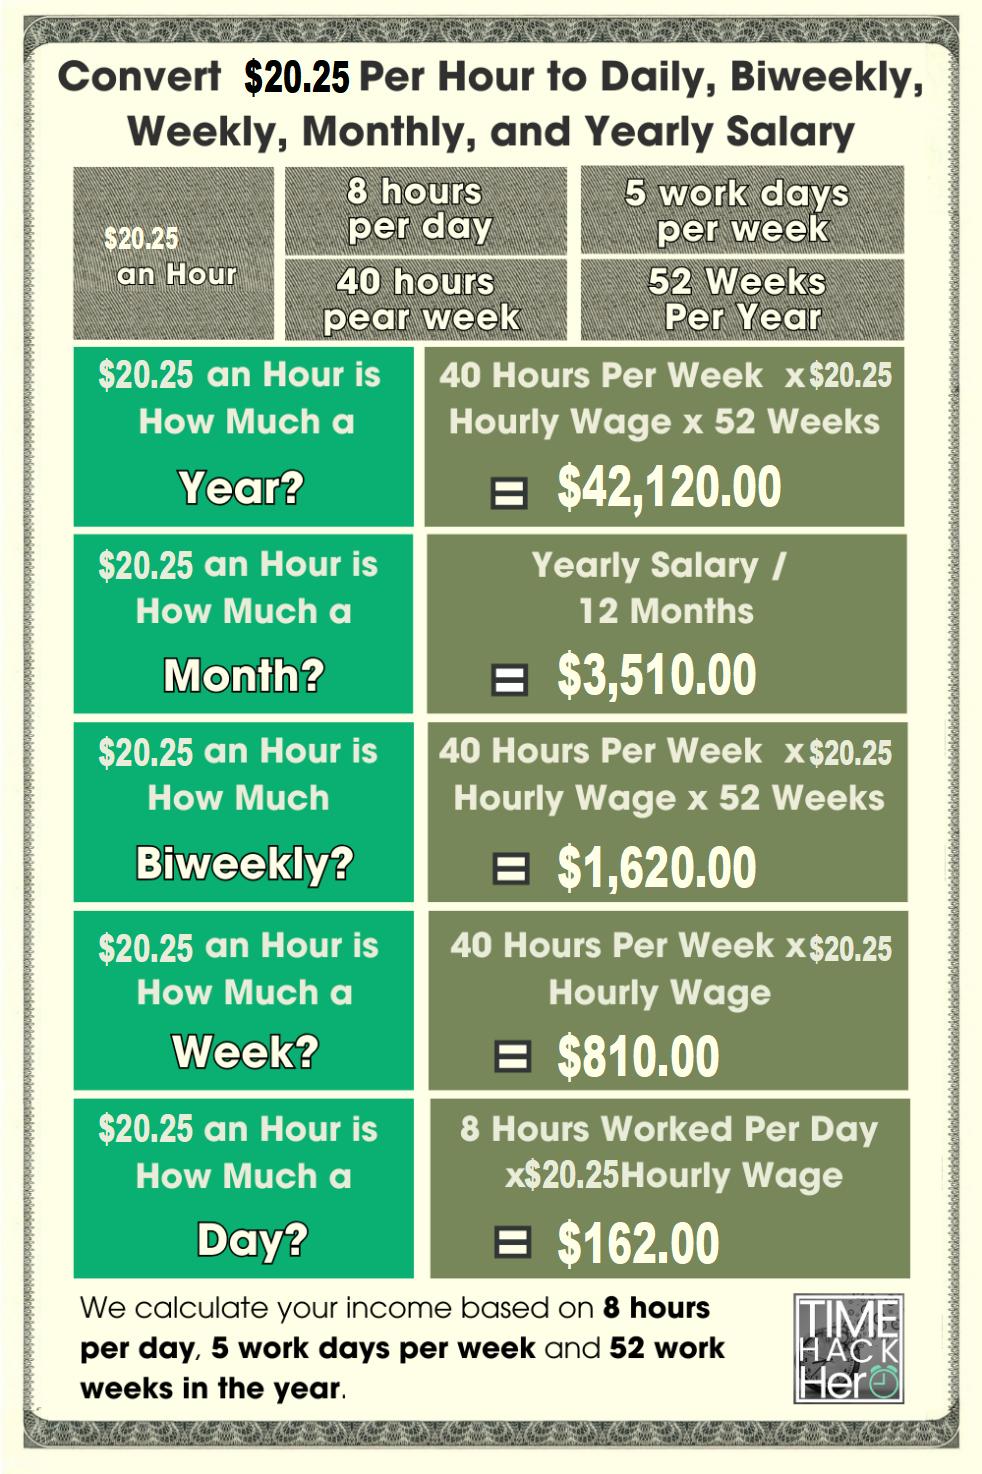 Convert $20.25 Per Hour to Weekly, Monthly, and Yearly Salary